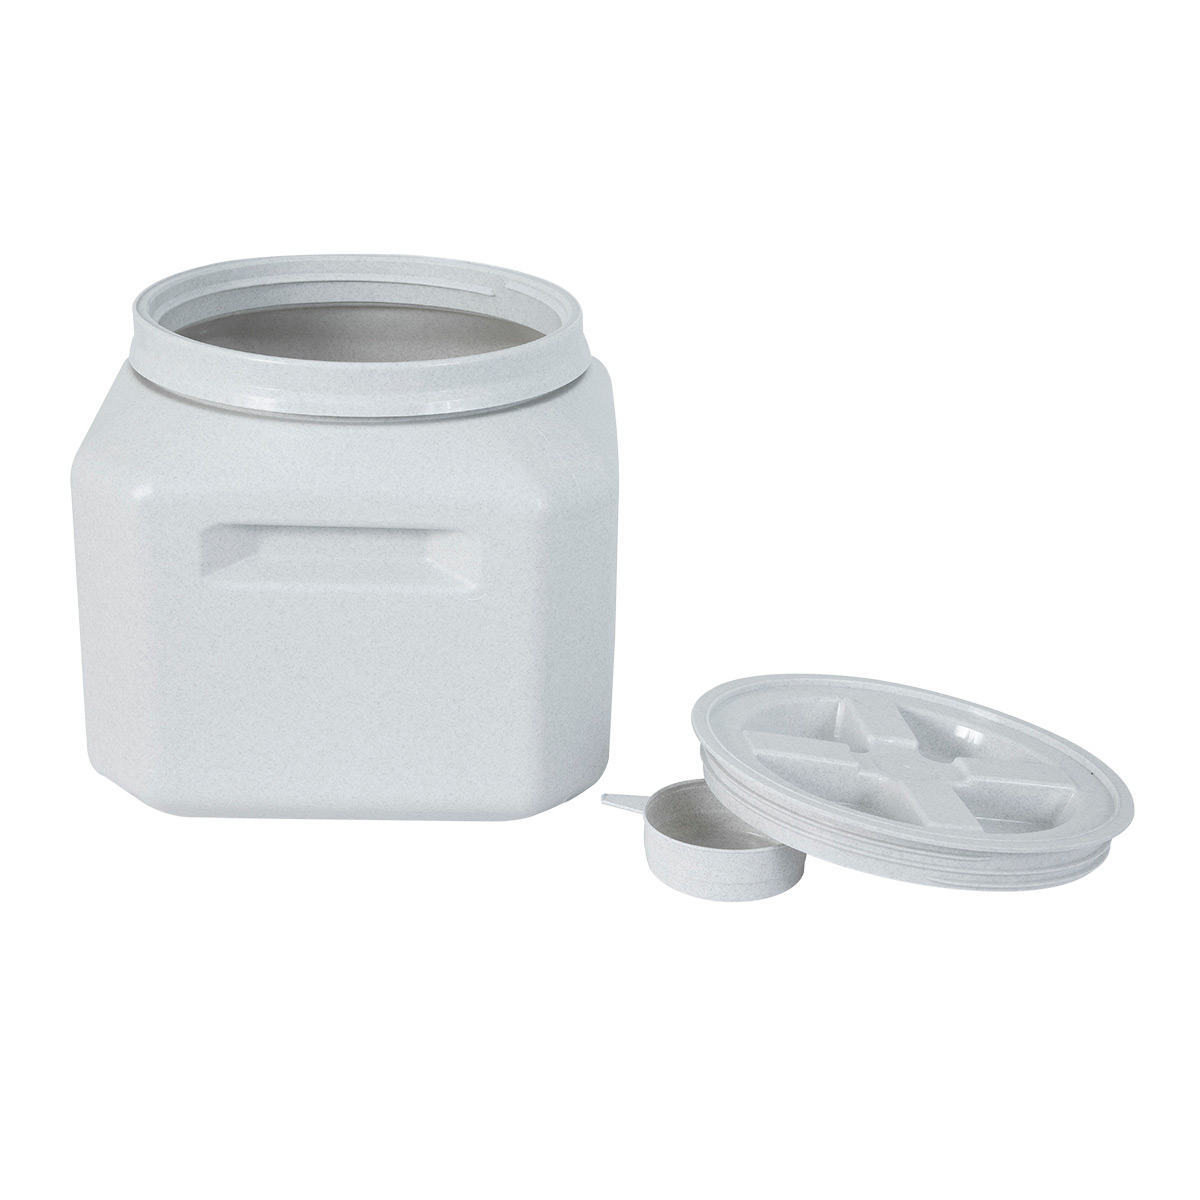 Vittles Vault Pet Food Container | The Container Store